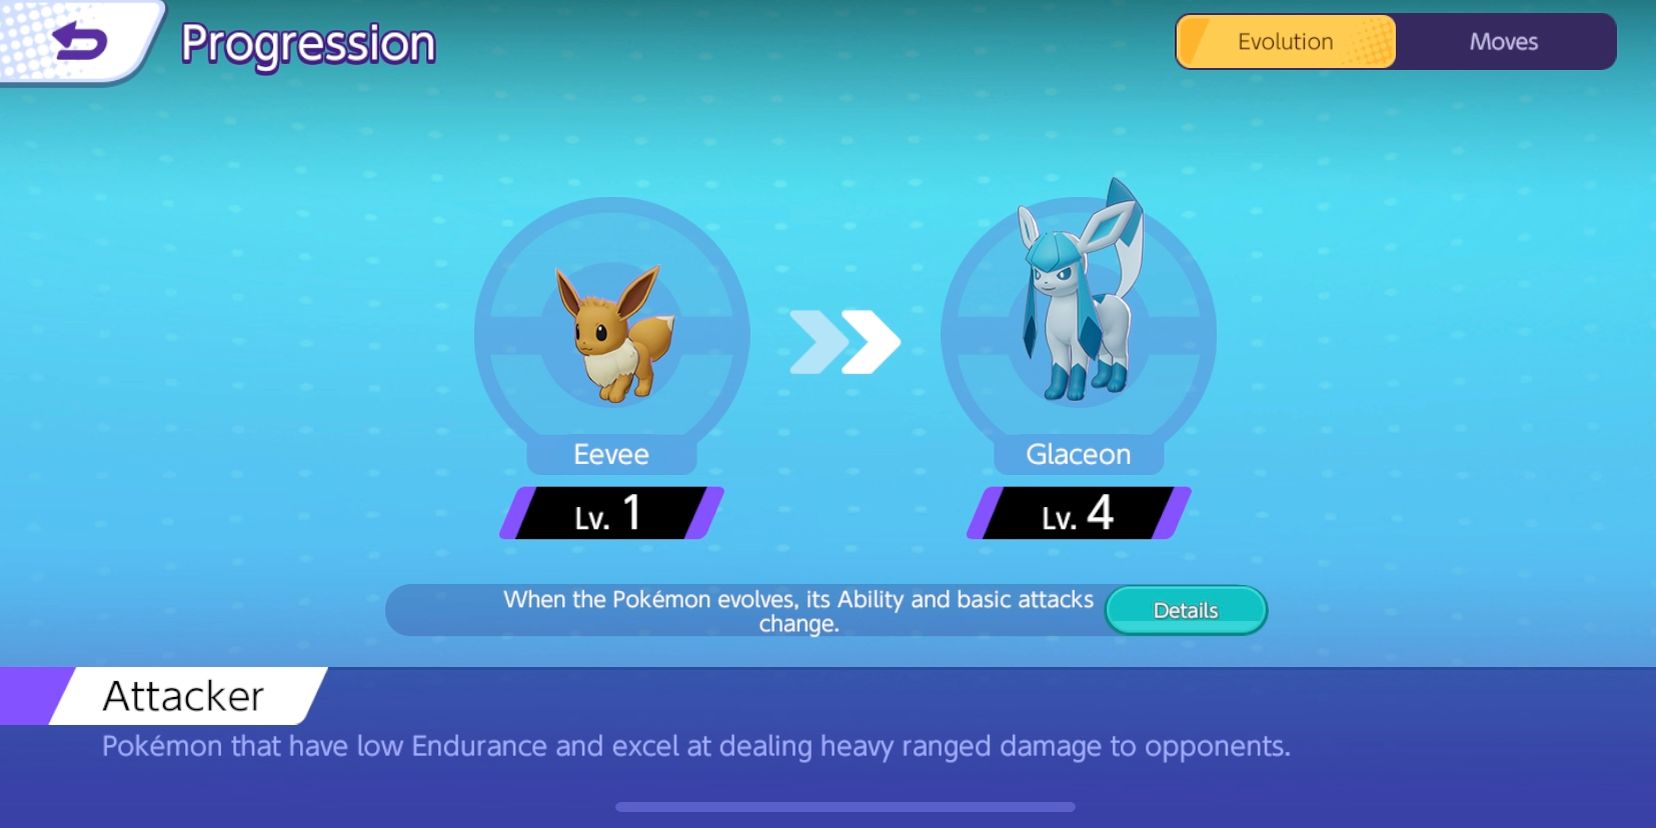 Glaceon progression screen from Pokemon Unite, showing that it evolves at level four